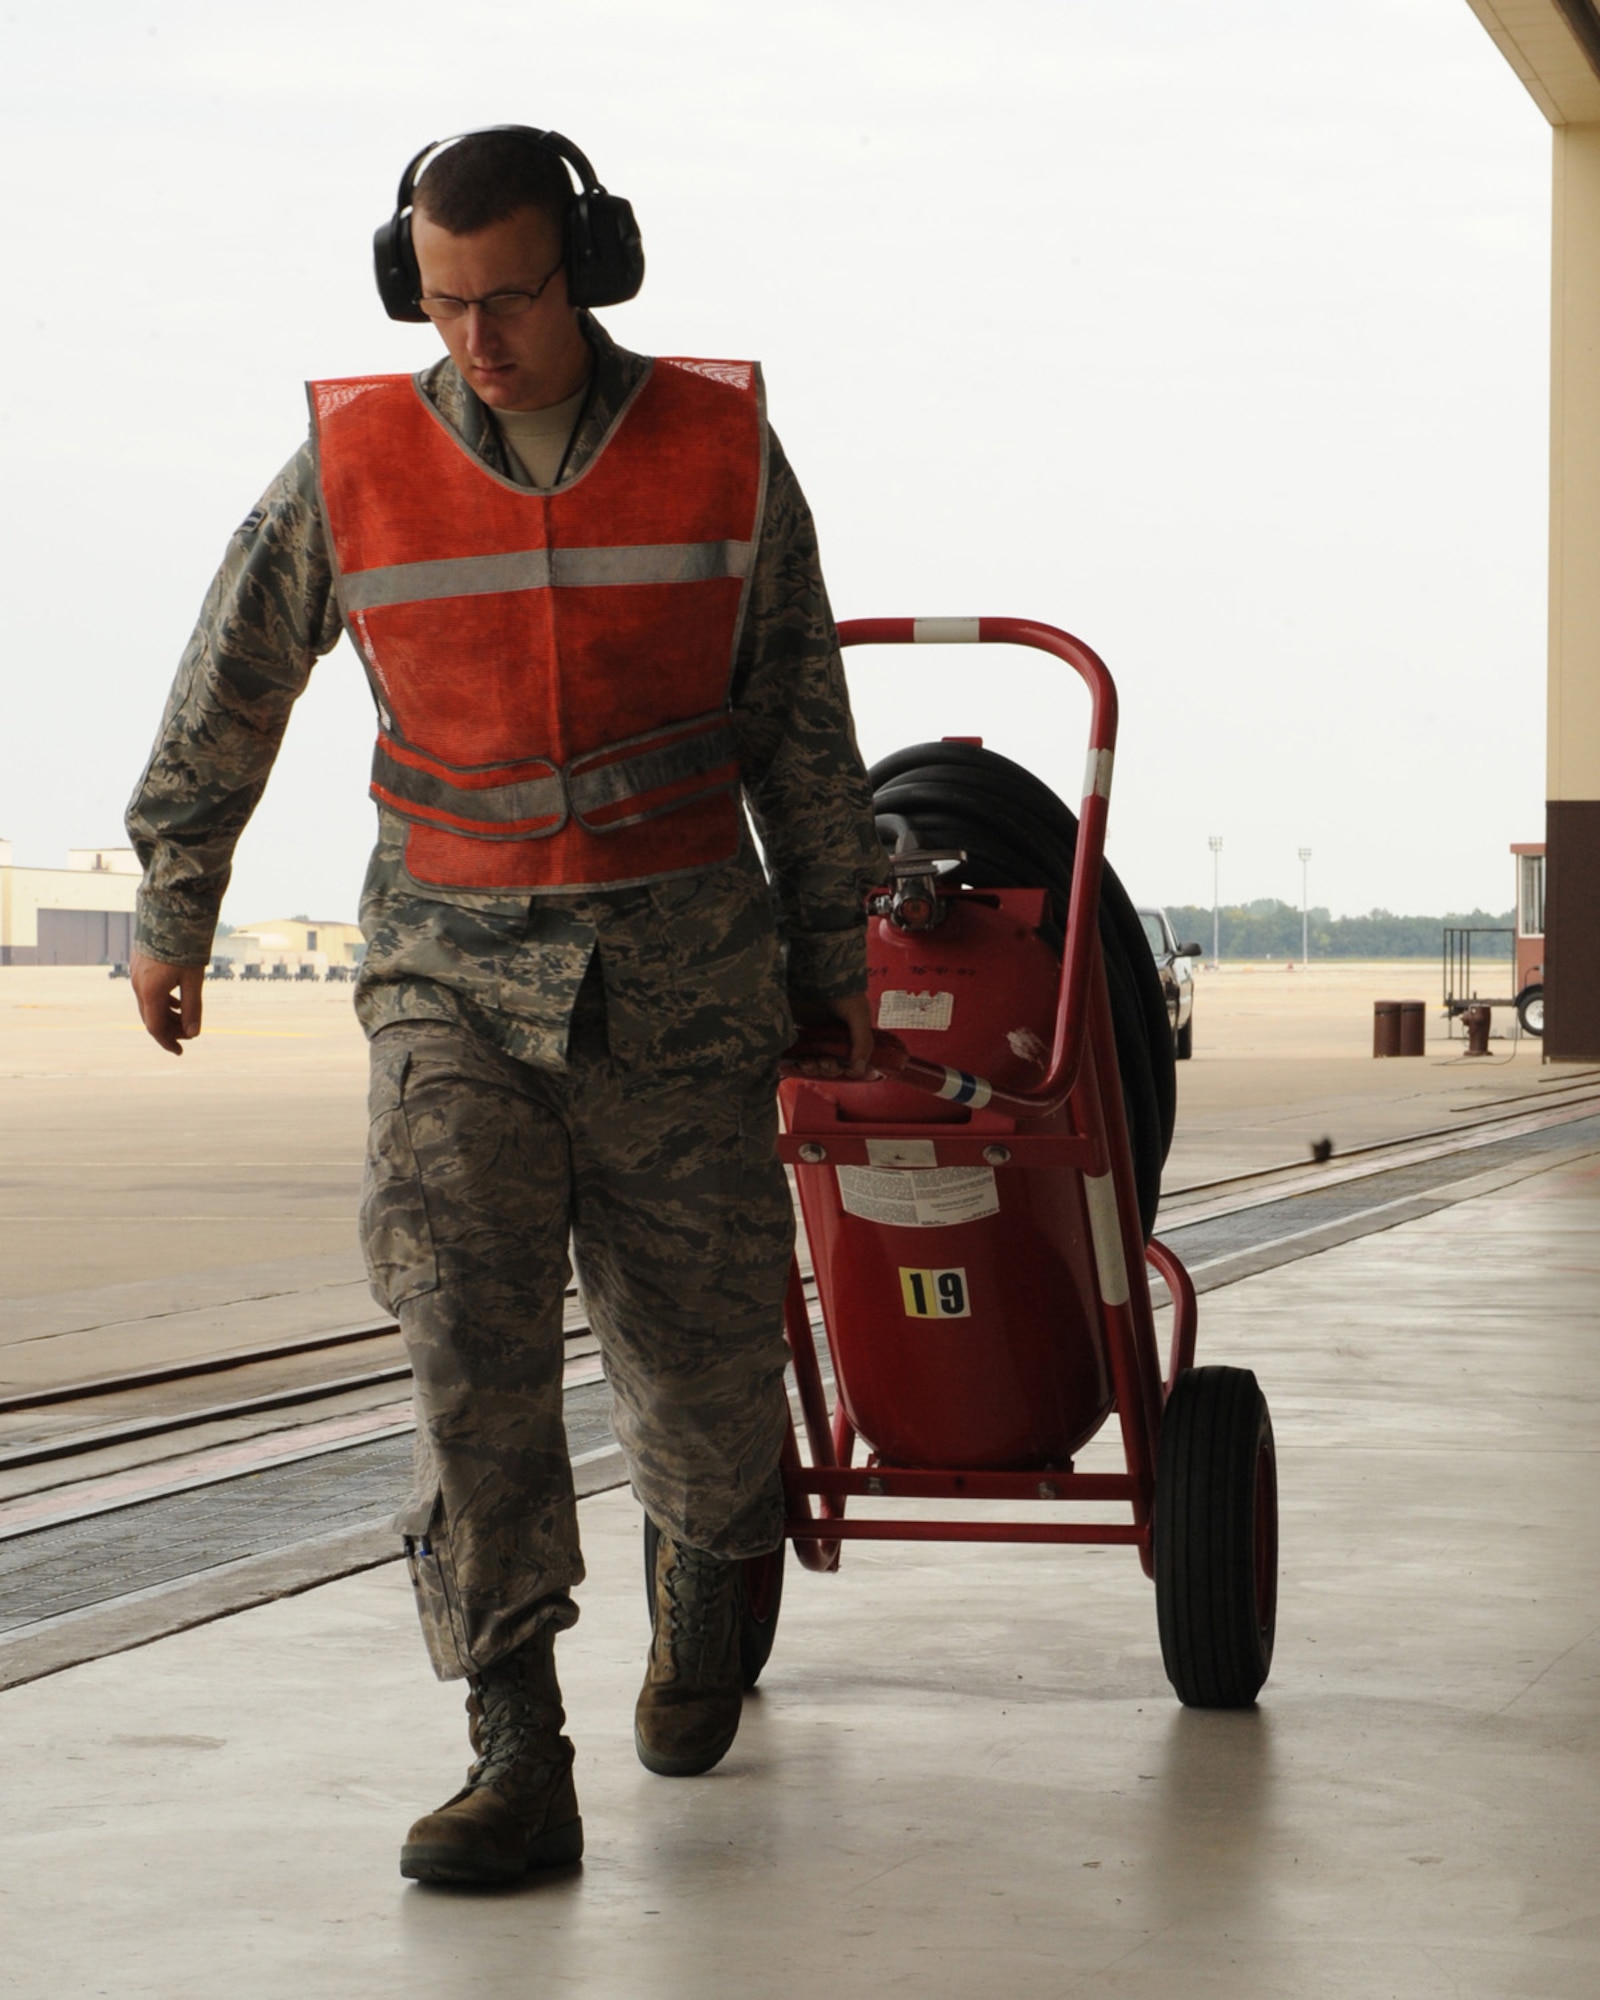 WHITEMAN AIR FORCE BASE, Mo. - Airman 1stClass Raymond Burgess, 509th Aircraft Maintenance Squadron, pulls the fire canister away from the front of the aircraft, getting prepared to taxi to launch, Sept. 3. (U.S. Air Force Photo by Airman 1st Class Carlin Leslie)